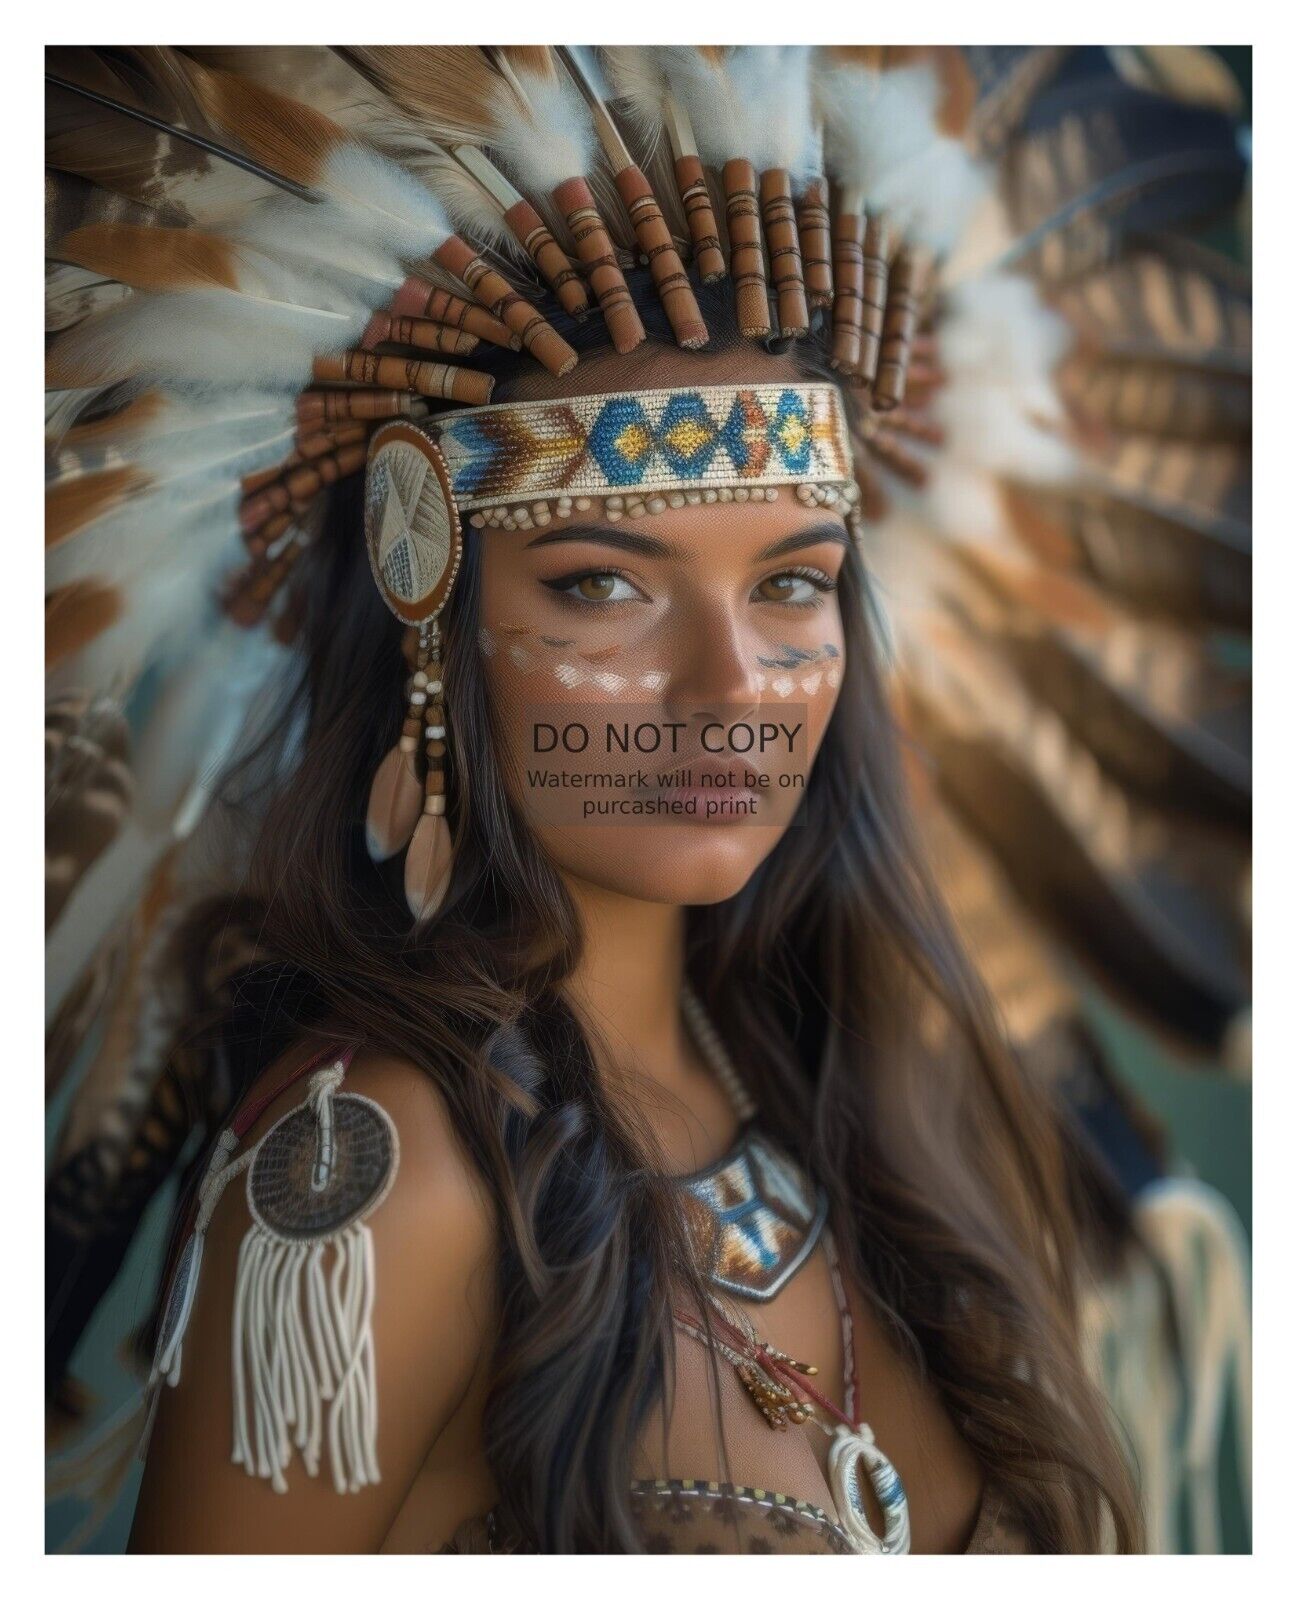 GORGEOUS YOUNG SEXY NATIVE AMEIRCAN LADY WEARING HEADRESS 8X10 FANTASY PHOTO